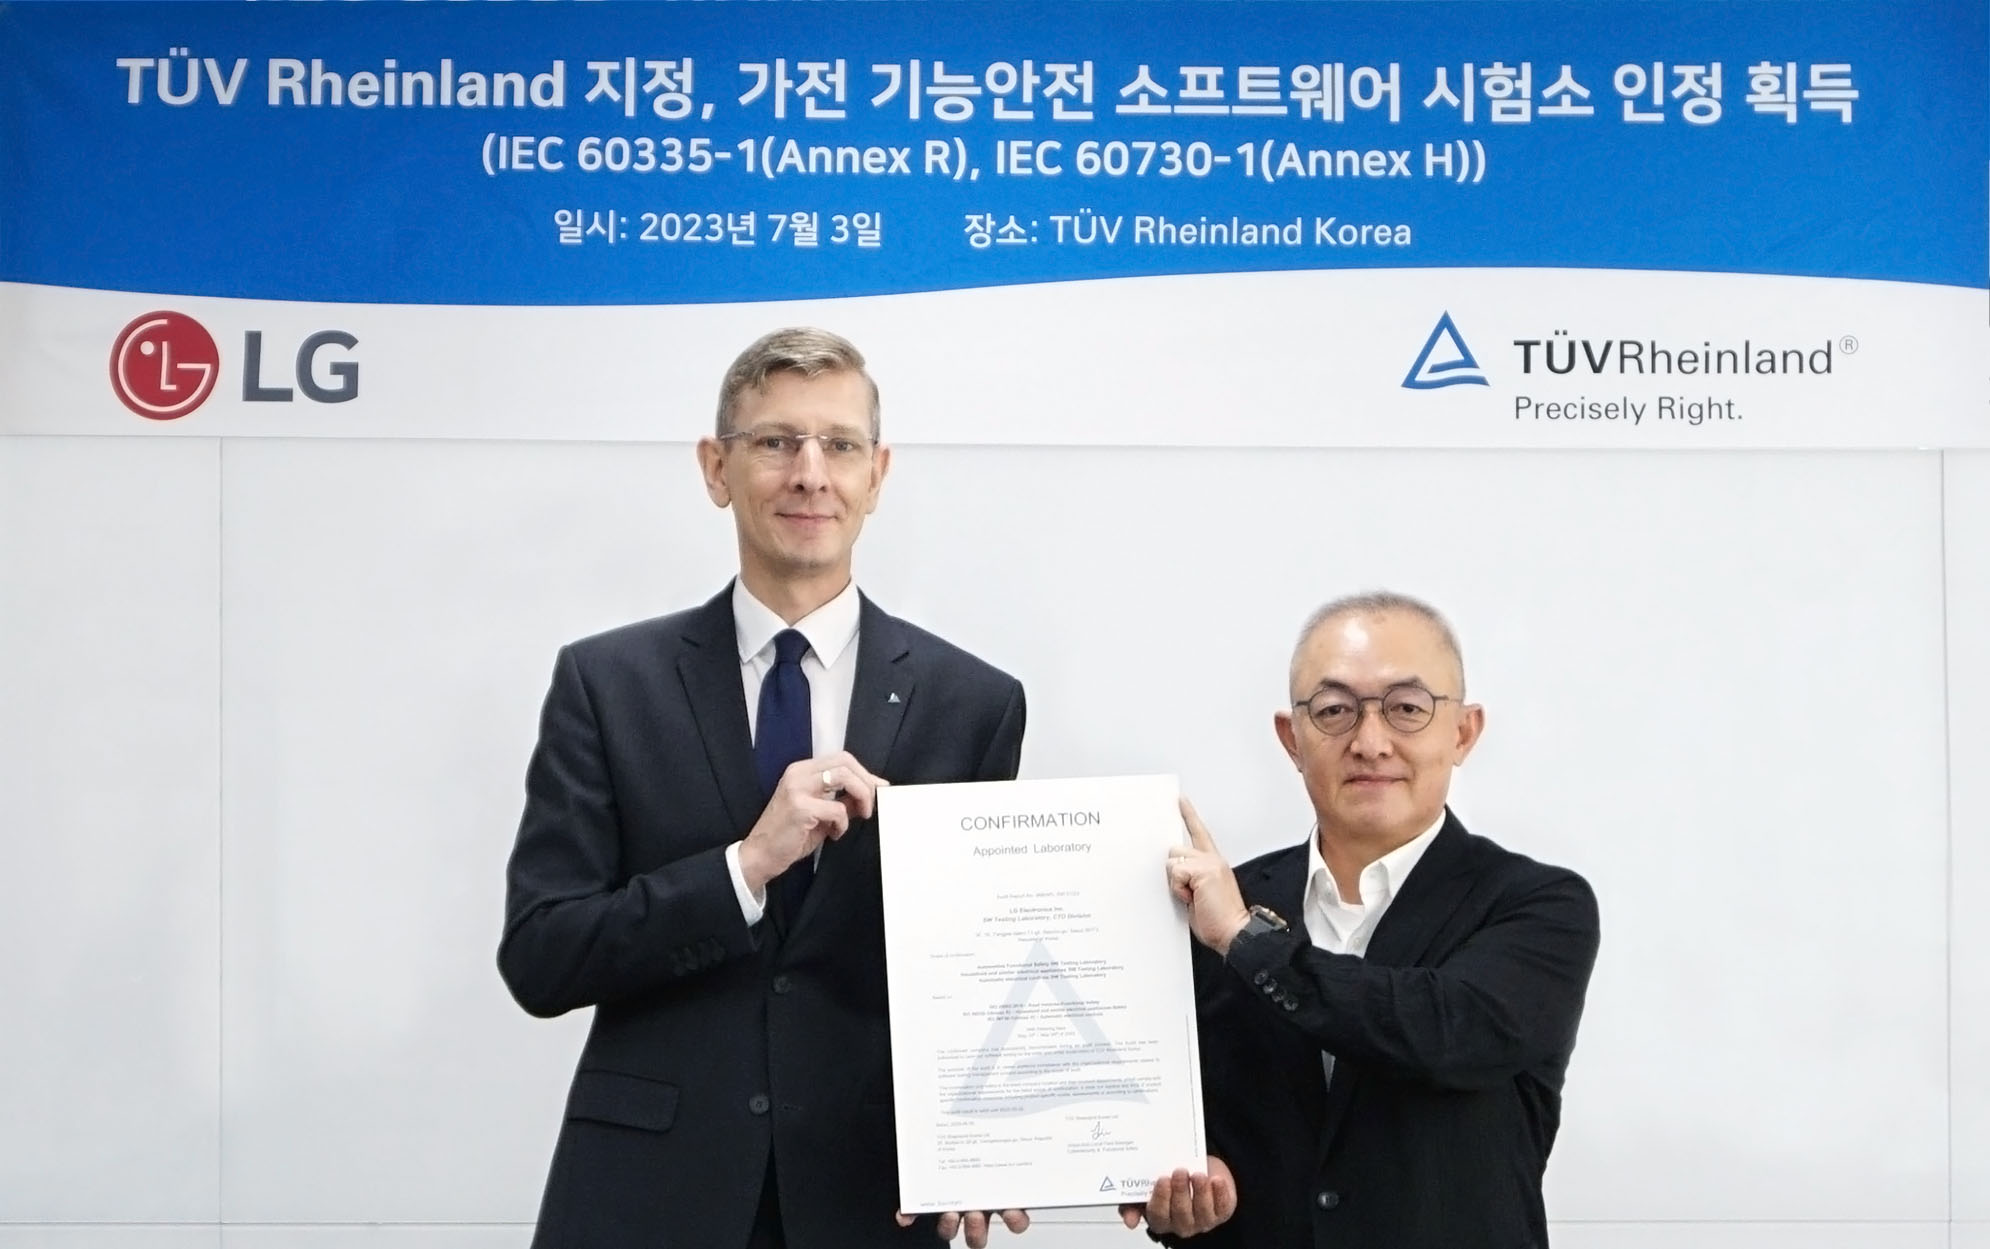 Park In-sung, head of the Software Center at LG Electronics, posing for a photo with a certificate from TÜV Rheinland